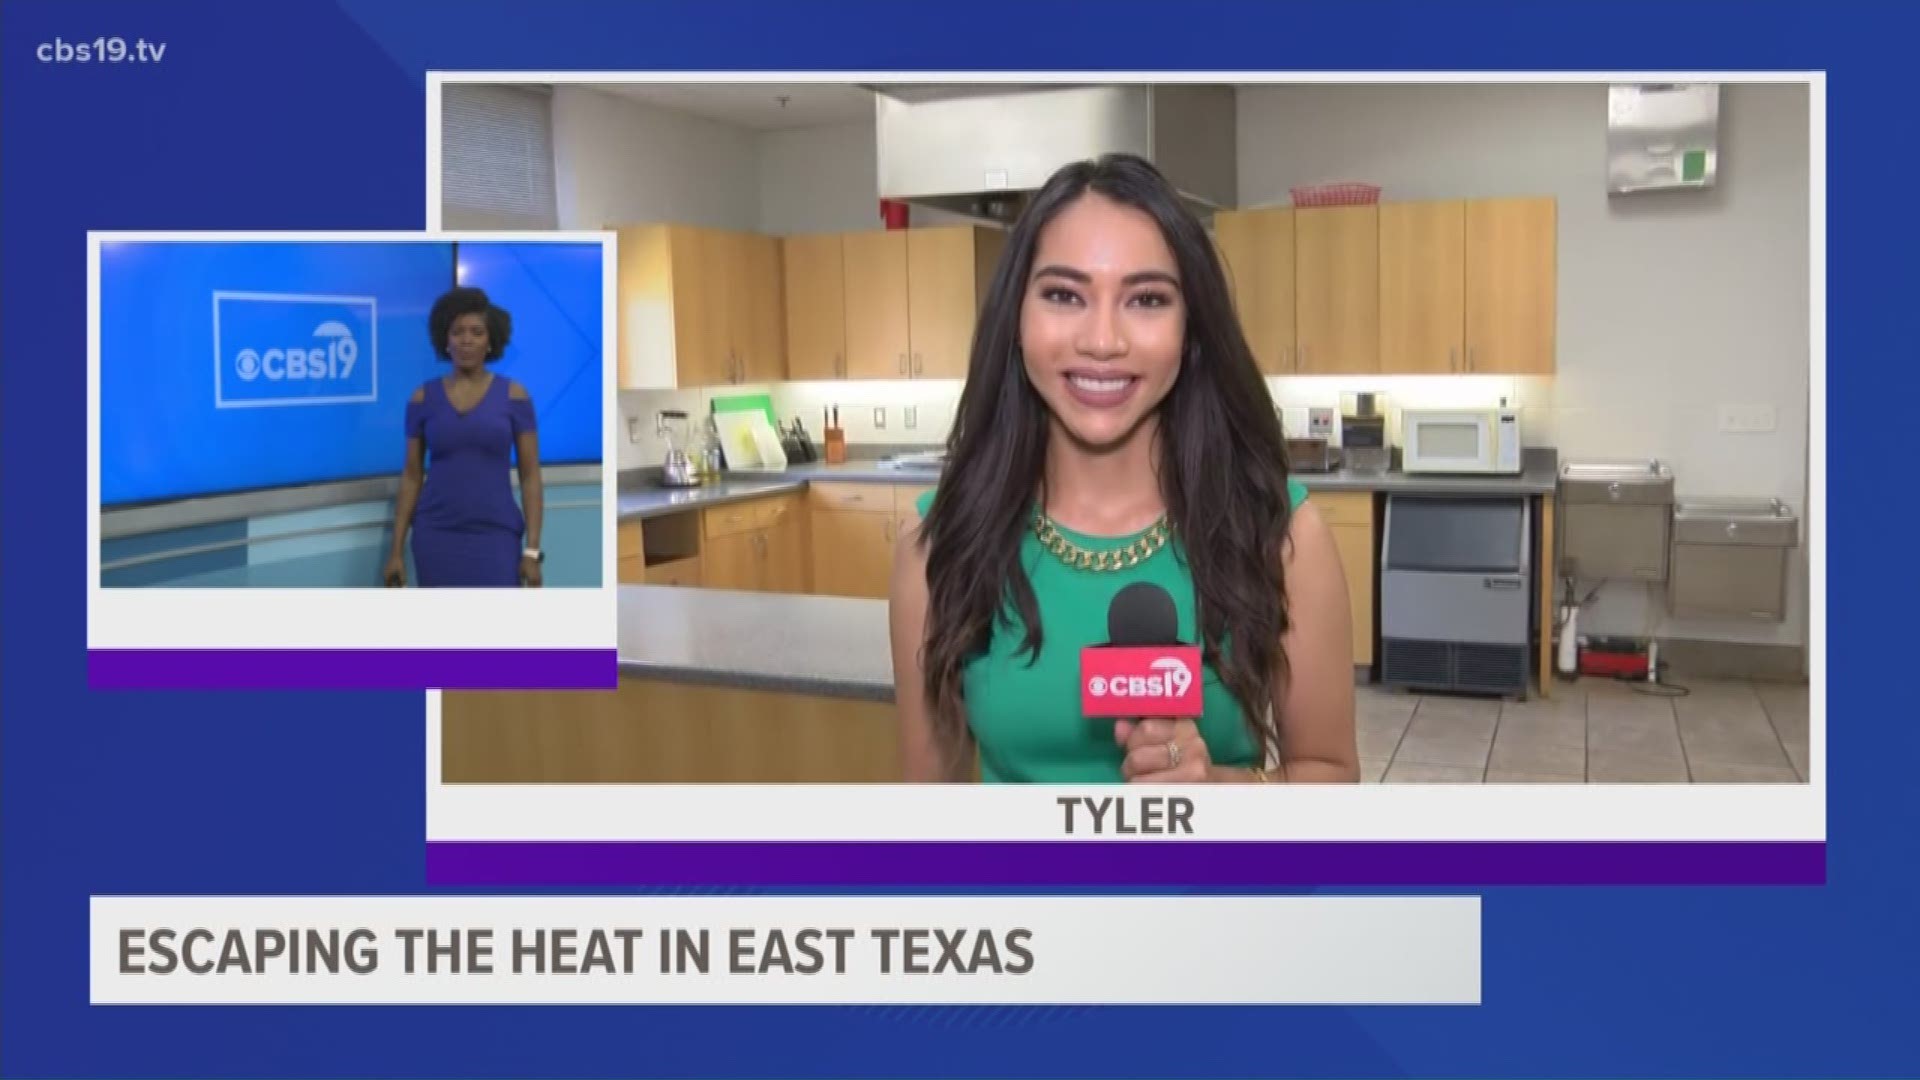 If you don’t have an air conditioner, or a cool place to stay, there are many places in Tyler that offer cooling stations to help you beat the summer heat.